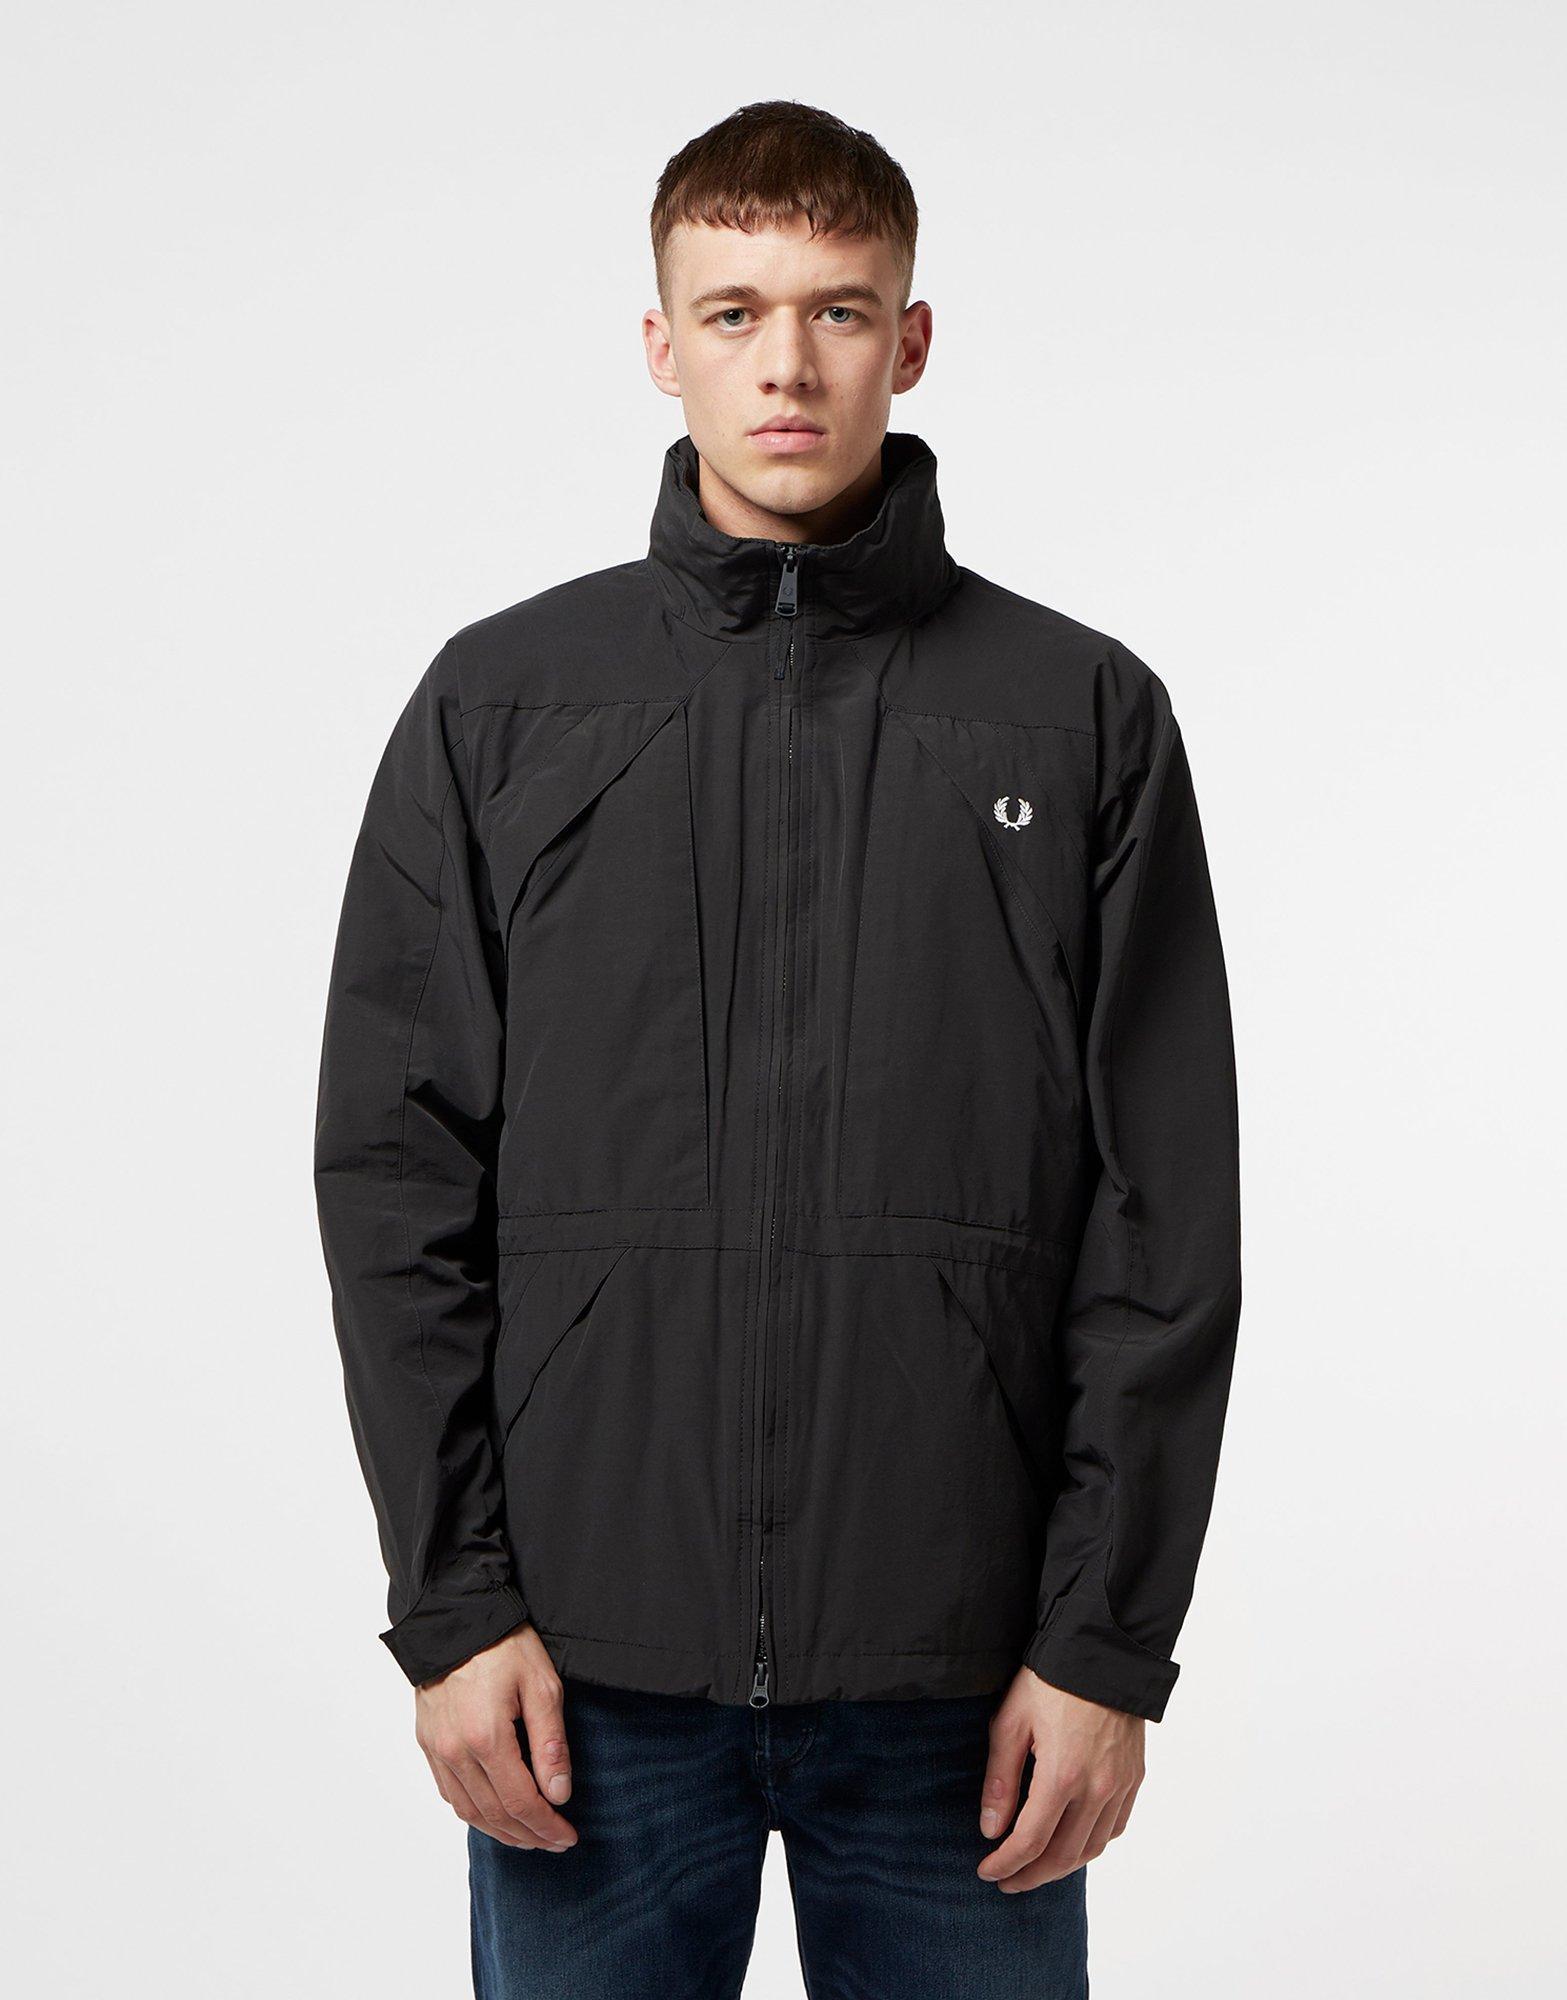 Fred Perry Cotton Offshore Lightweight Jacket in Black for Men - Lyst